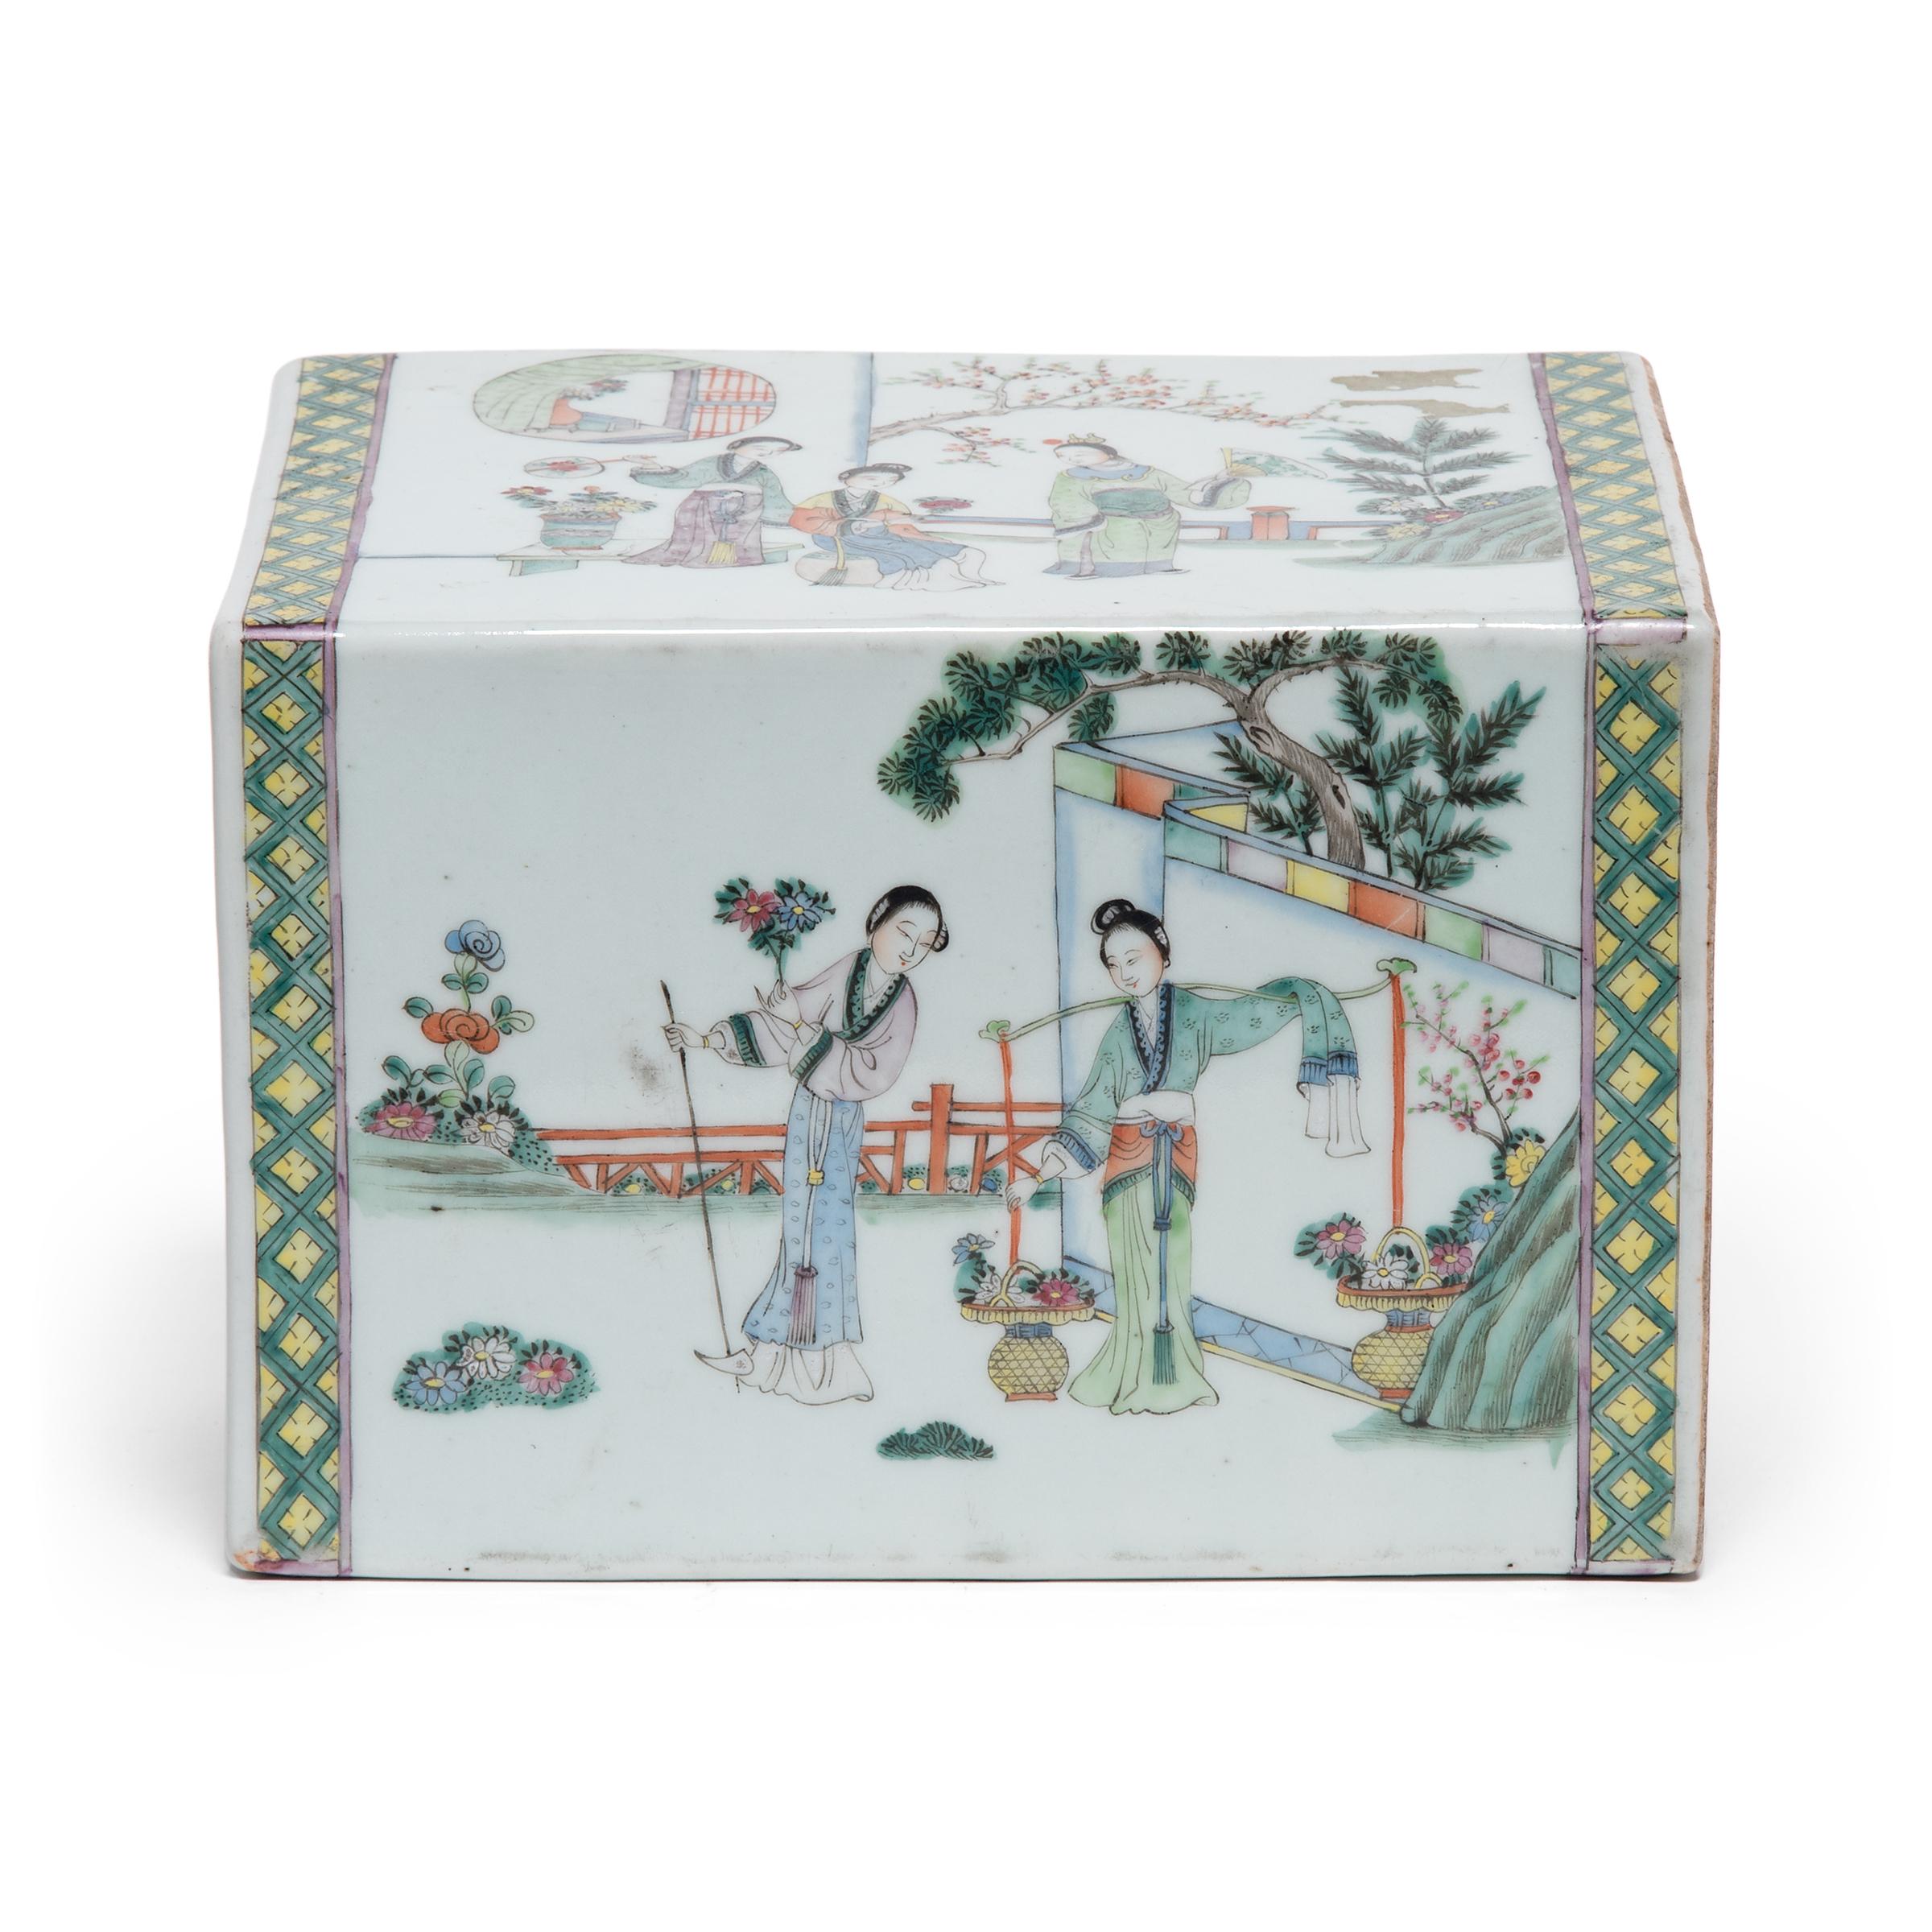 This large porcelain block is an oversized version of the headrests once used by well-to-do women to keep their elaborate hairstyles intact while sleeping. Its exaggerated scale and flat sides make this headrest the ideal canvas for intricate